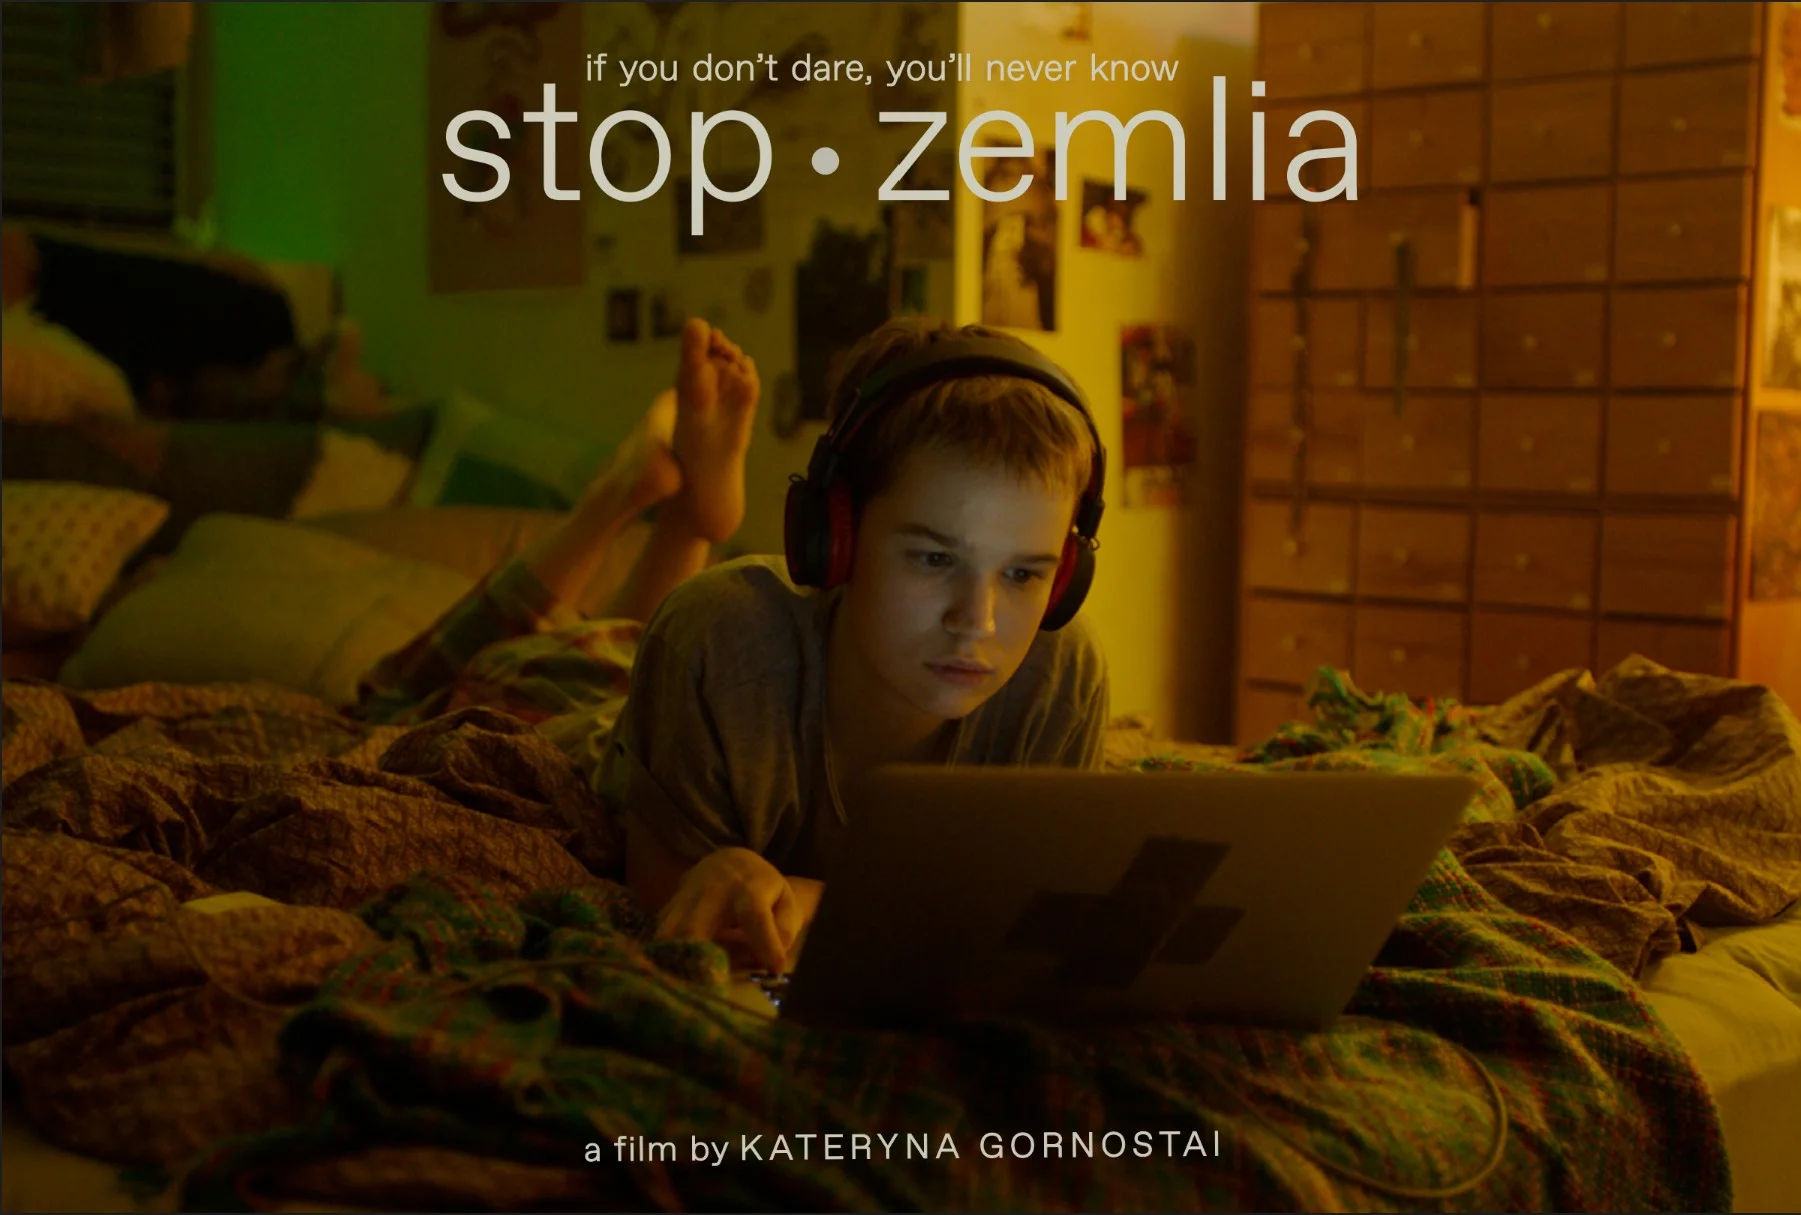 Stop-Zemlia (2022) – Review/ Summary (with Spoilers)